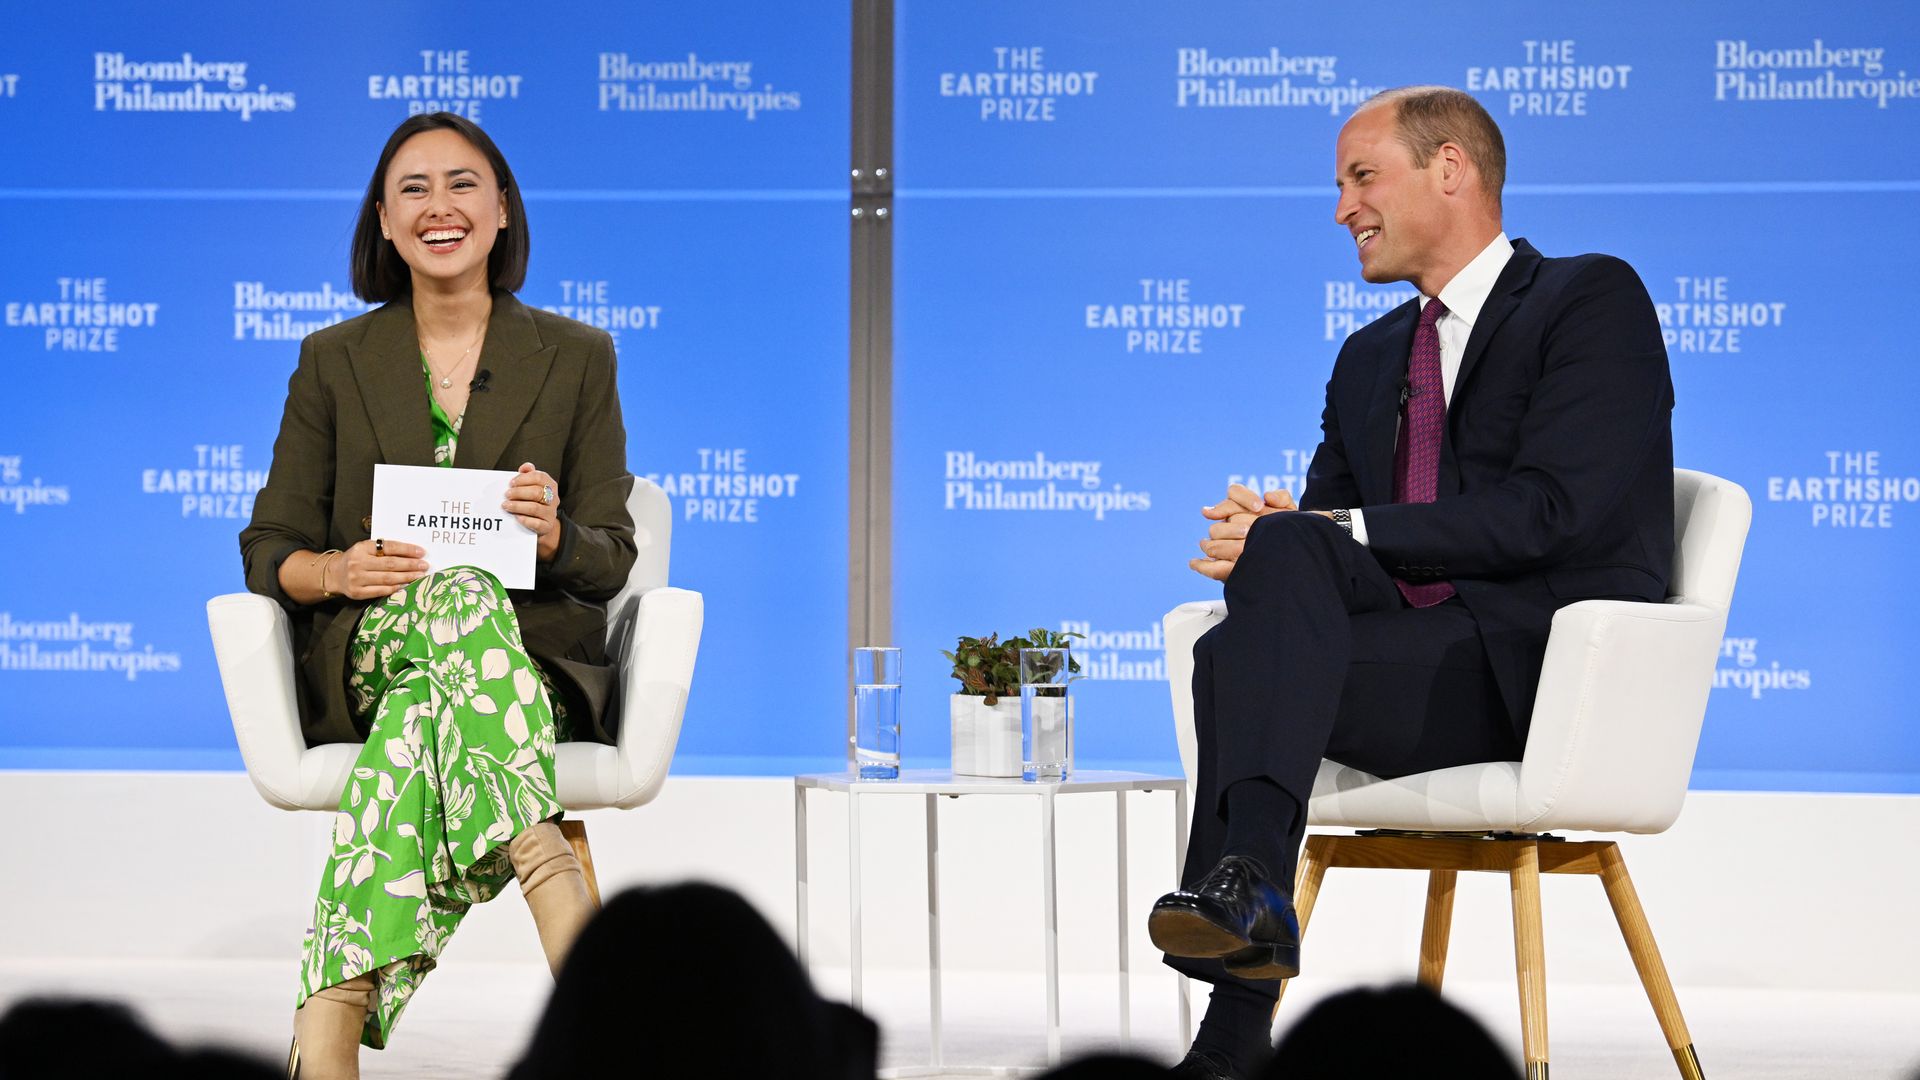 Vaitea Cowan with Prince William at The Earthshot Prize Innovation Summit in New York City last month